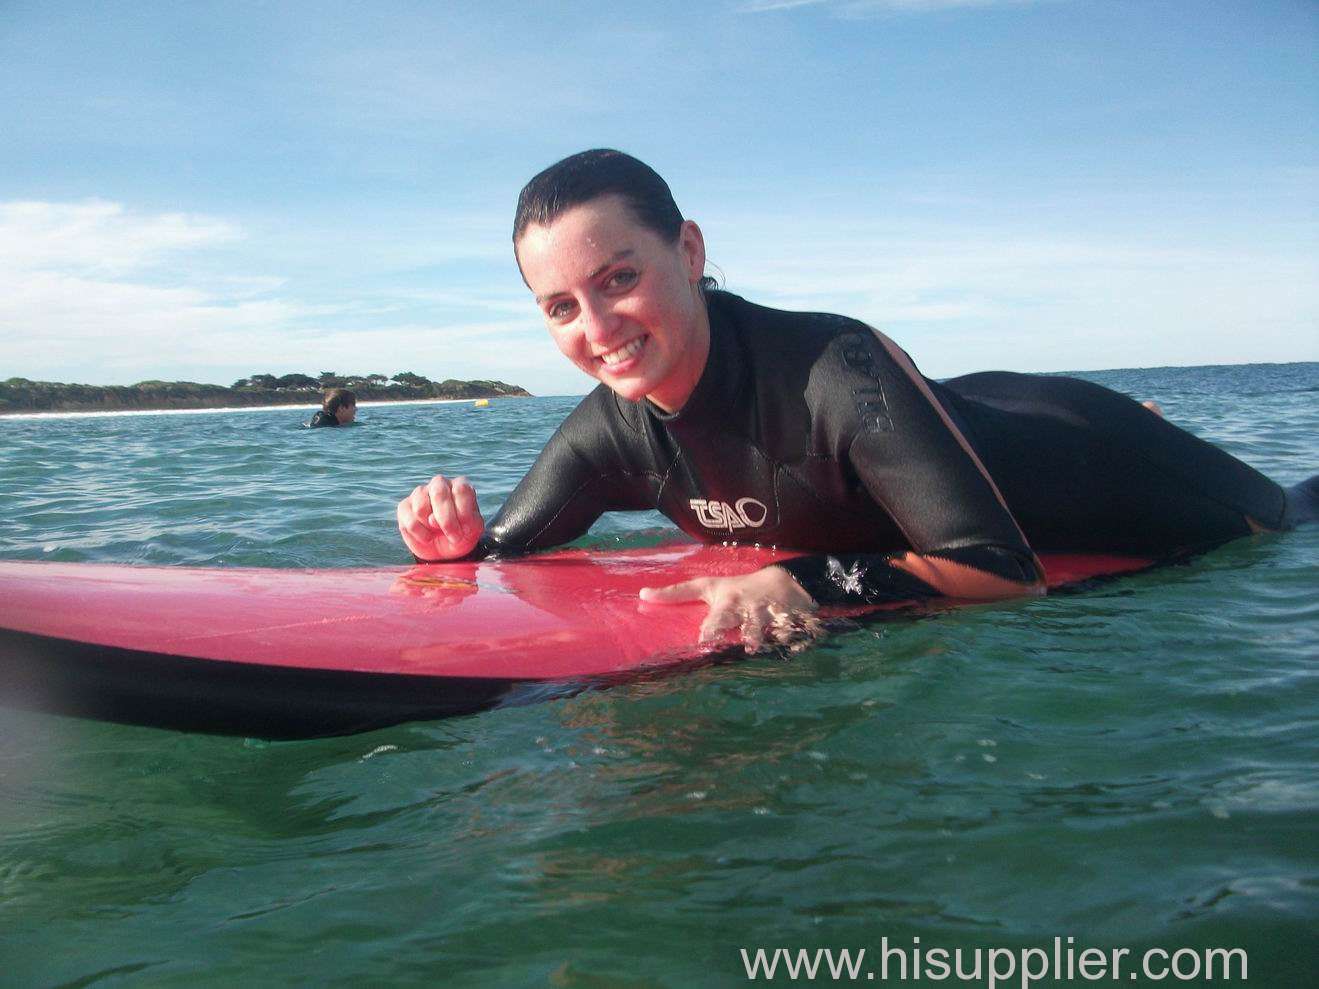 Tips for SUP Boards Care